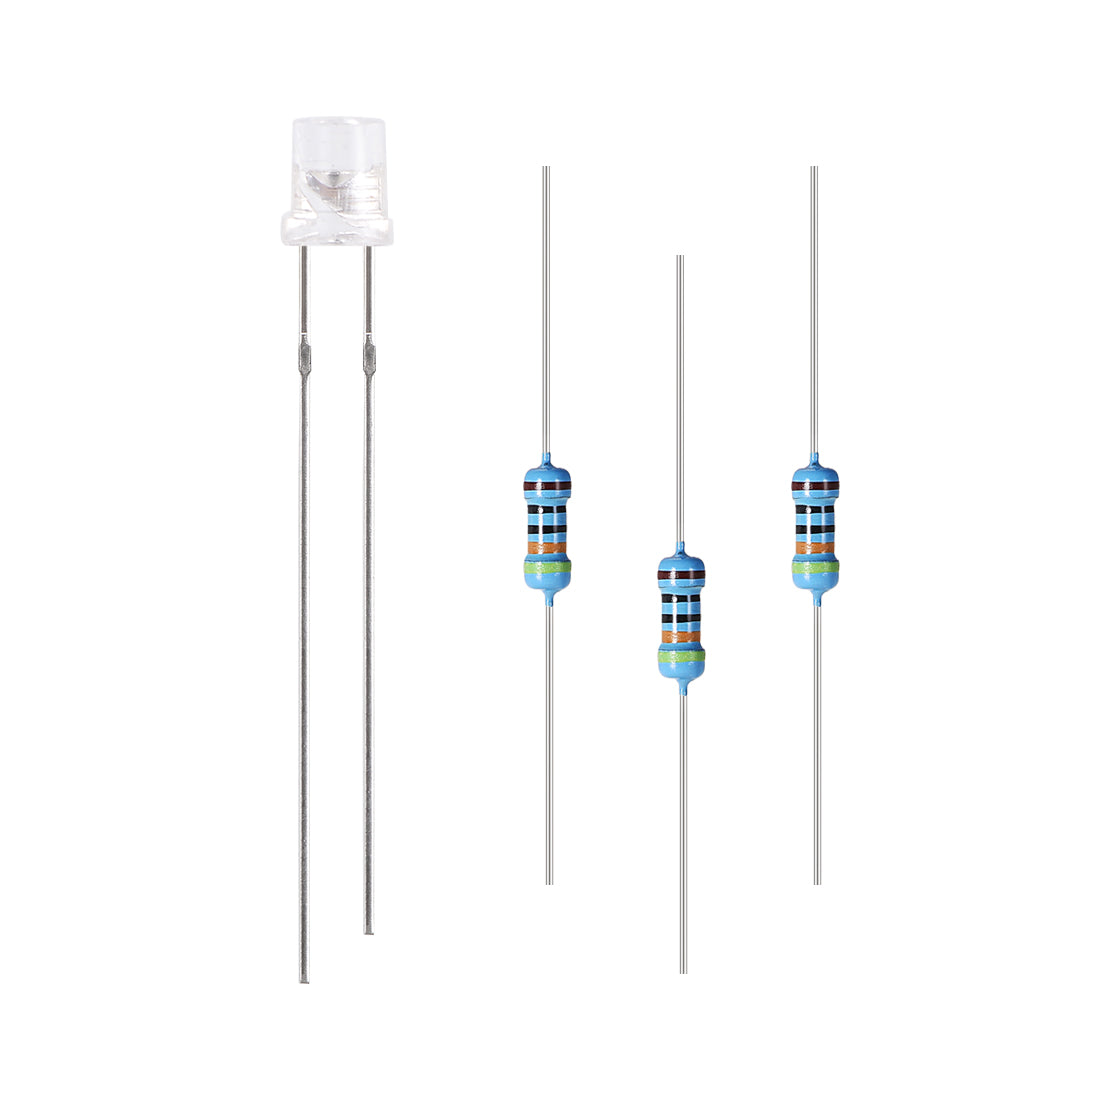 uxcell Uxcell 200Set 3mm LED Diodes w Resistor, Clear Lens Multicolor Slow-Flashing, Flat Head 29mm Pin